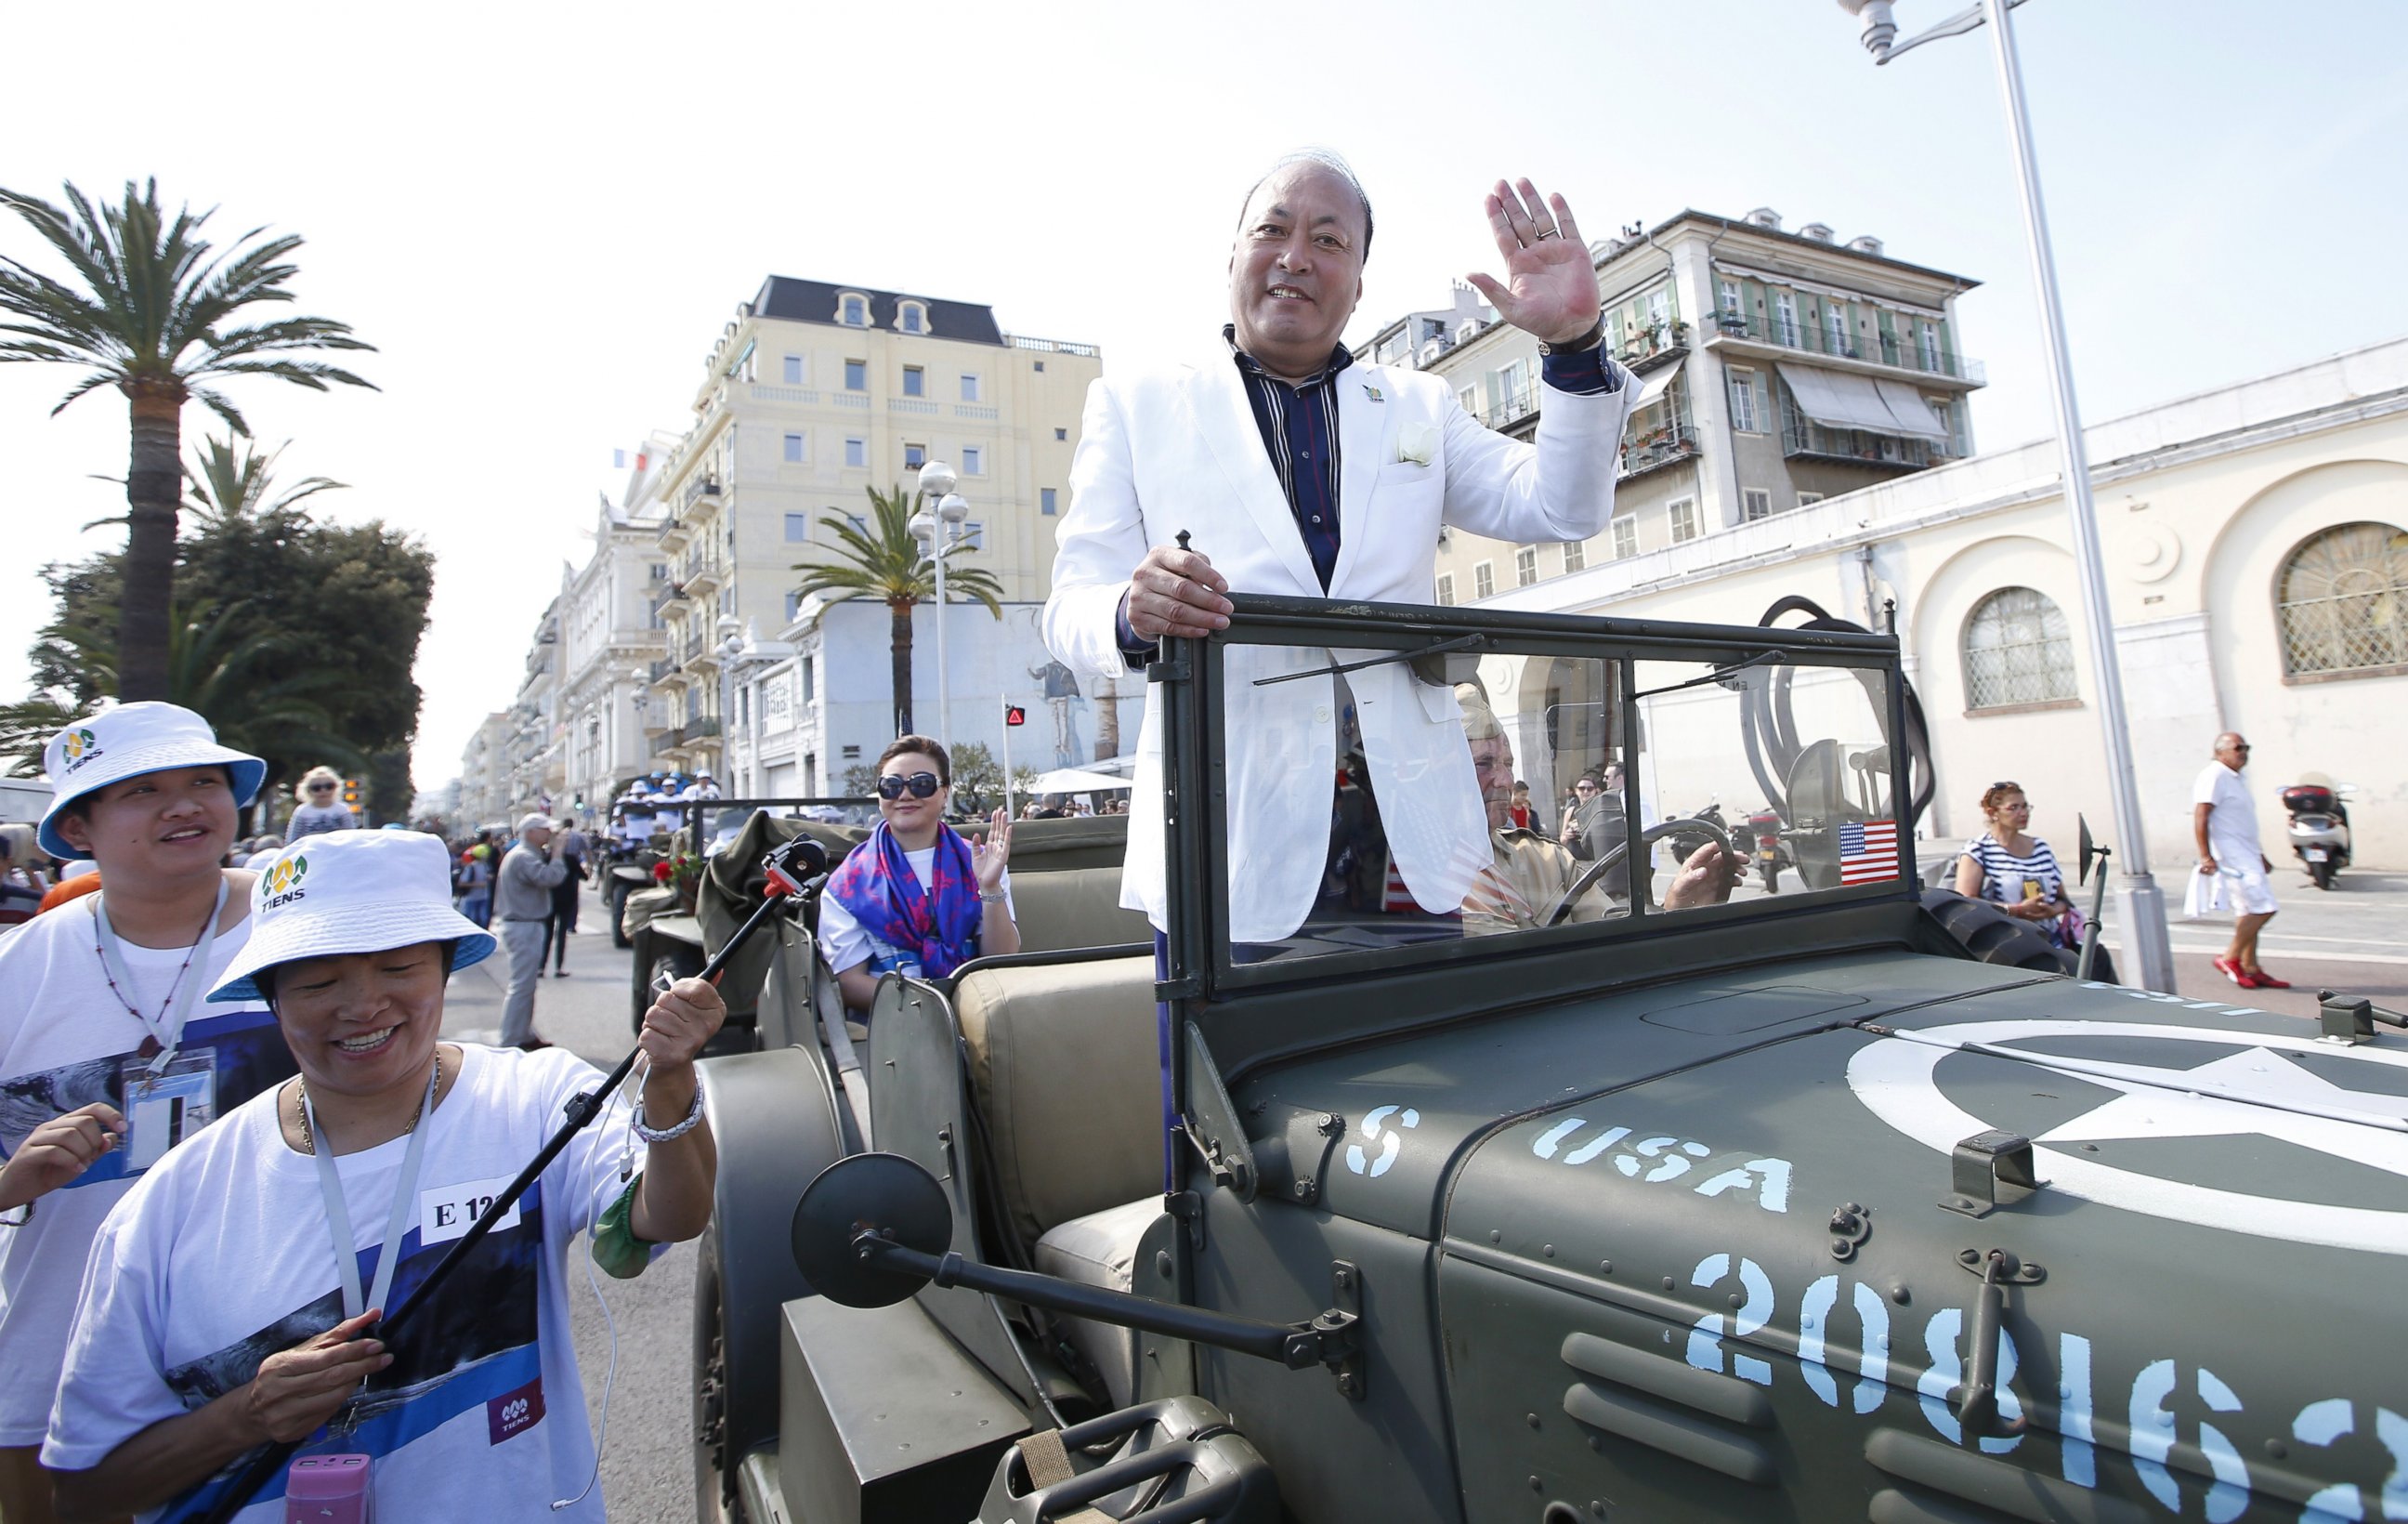 PHOTO: Li Jinyuan, CEO of 'Tiens' rides in a parade on May 8, 2015 in Nice, France as part of the two-day celebration weekend for the 20th anniversary of his company.